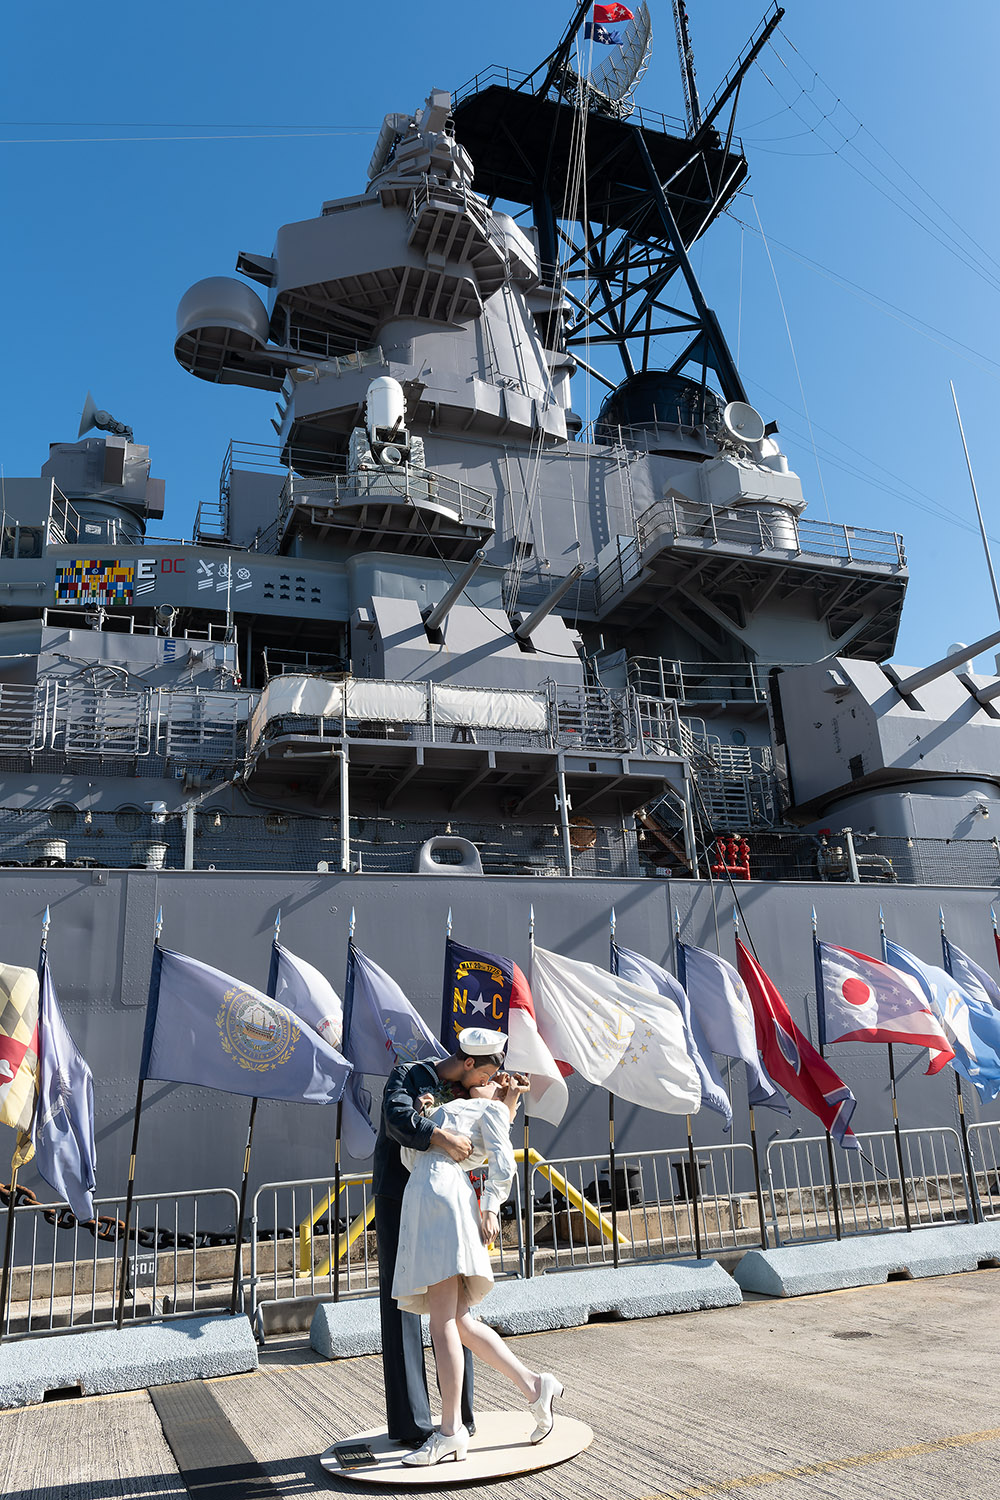 The U.S.S. Missouri behind a statue of a famous Alfred Eisenstaedt photograph